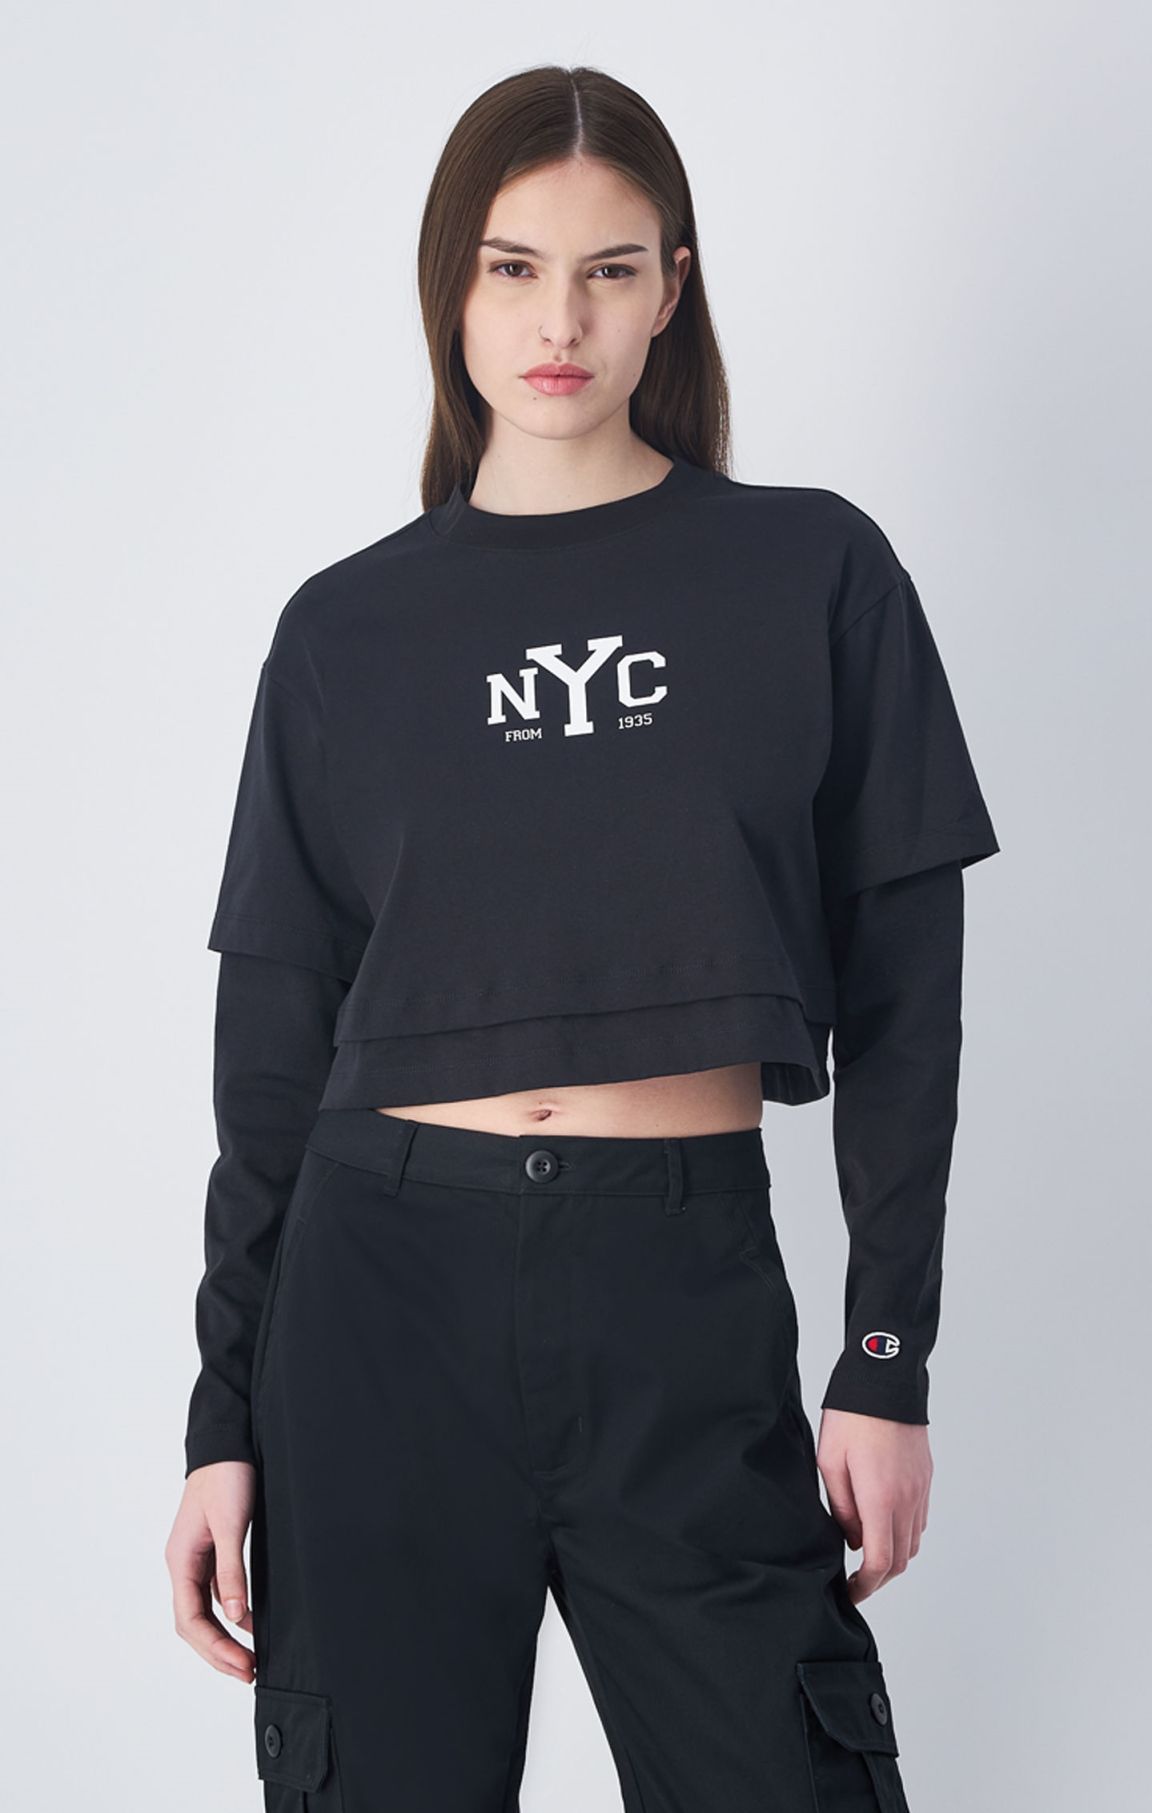 NYC Cropped Long-Sleeve T-Shirt